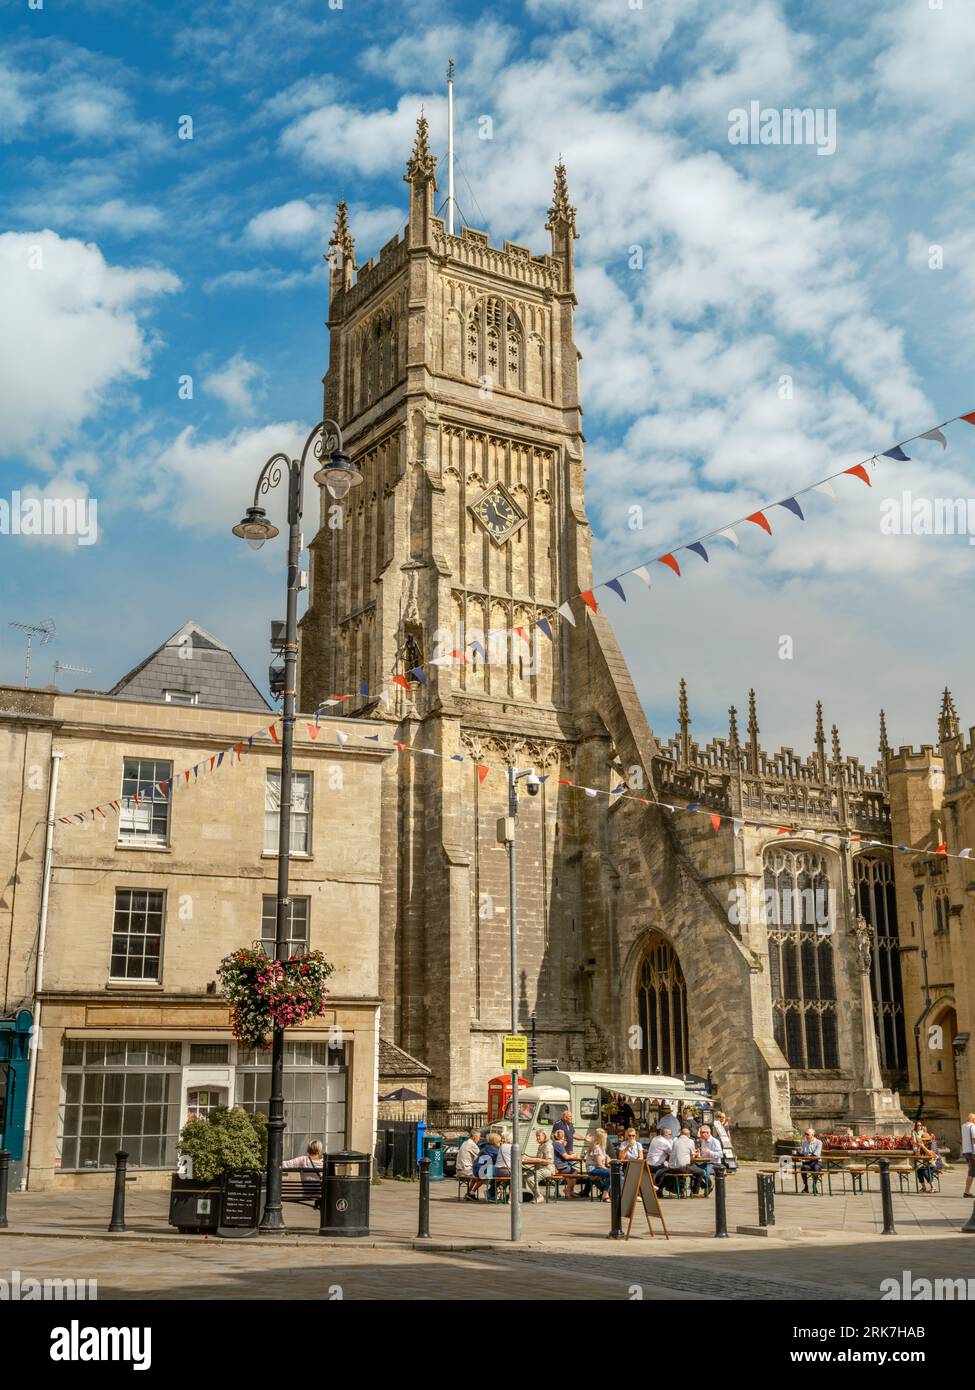 Cirencester, Gloucestershire - England. People sit and enjoy a snack in the late summer sunshine under the impressive tower of Cirencester Parish Chur Stock Photo